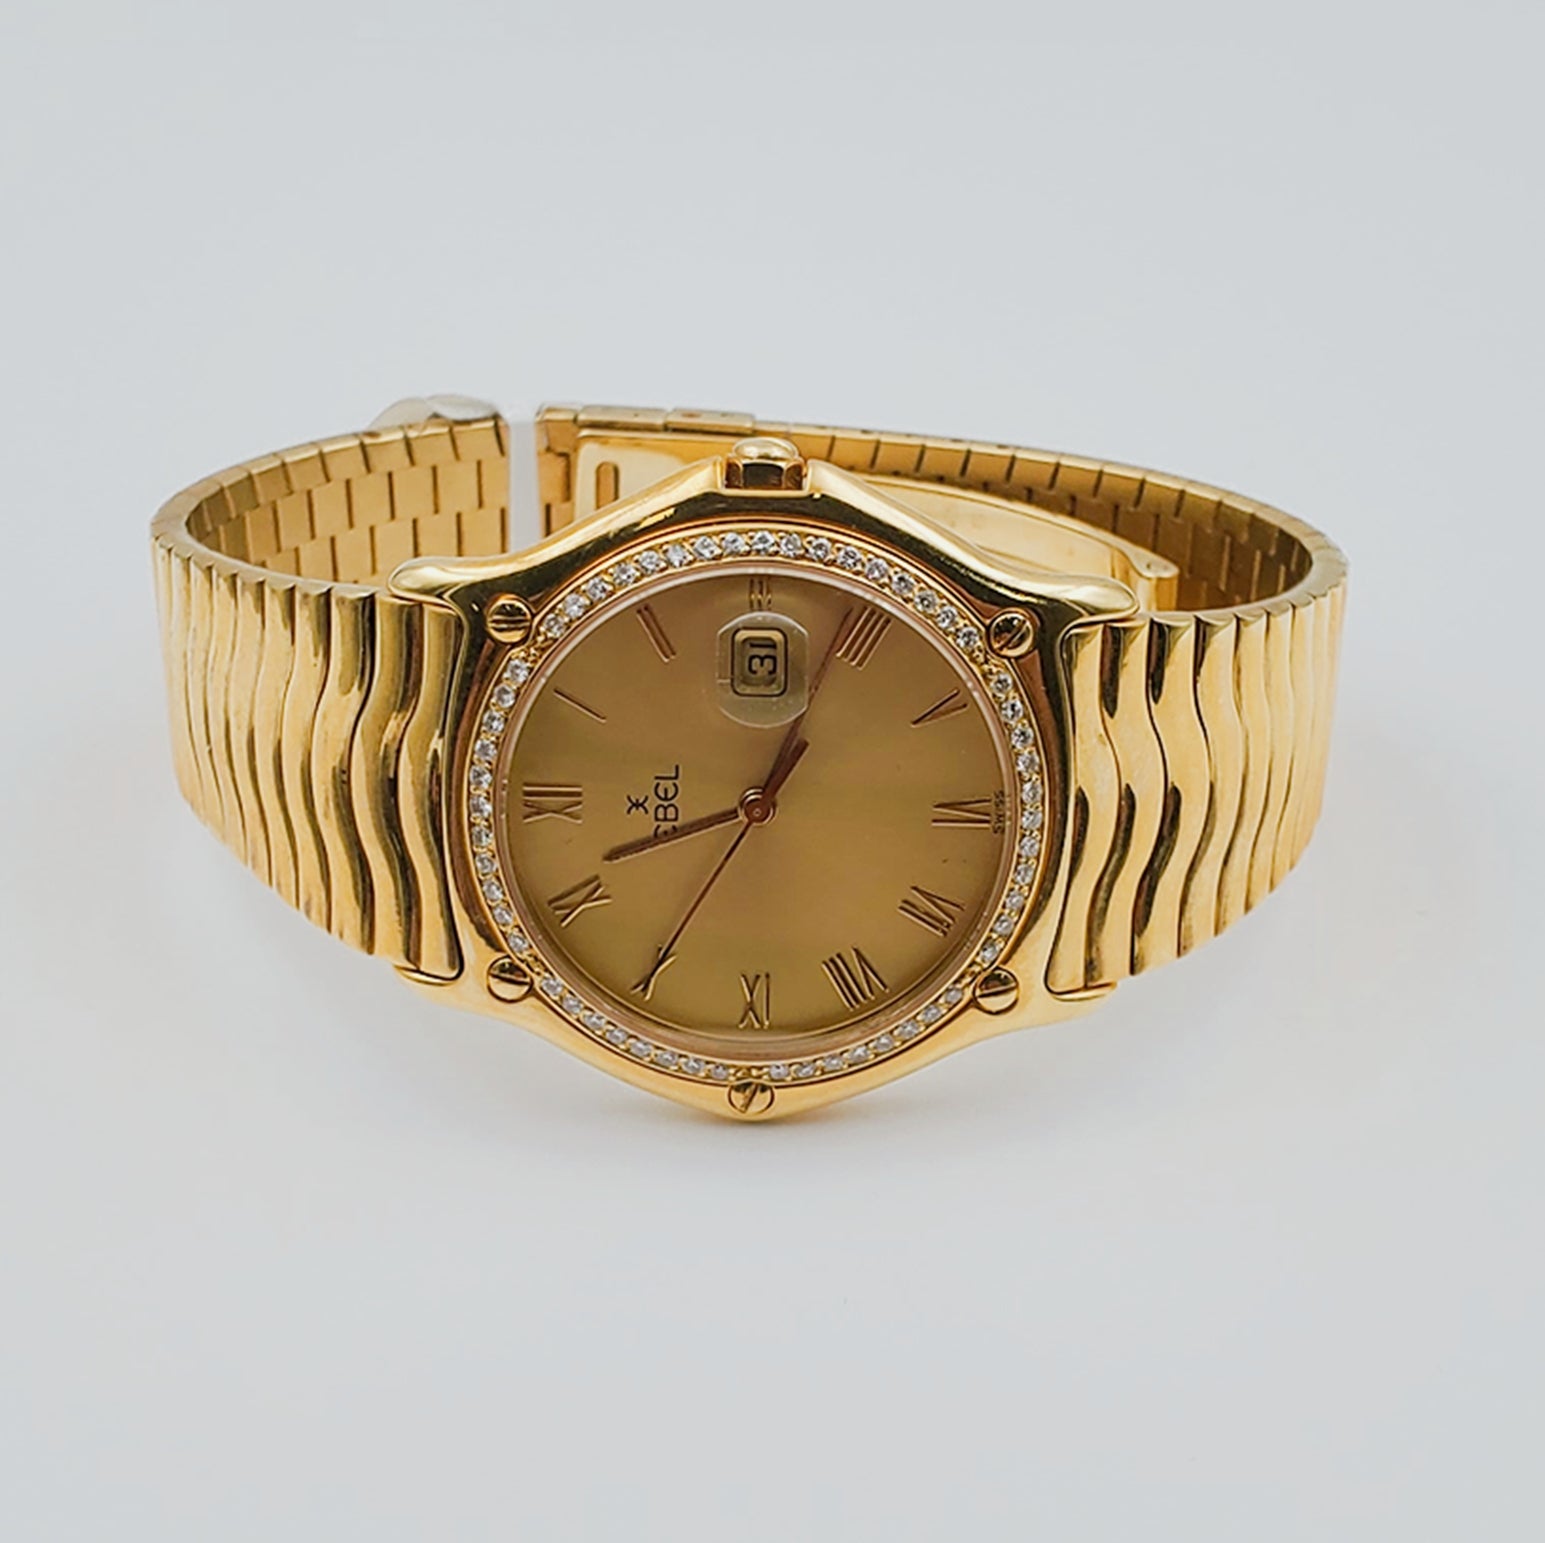 Men's Ebel 36mm Solid 18K Yellow Gold Band Watch with Champagne Dial and Diamond Bezel. (Pre-Owned)